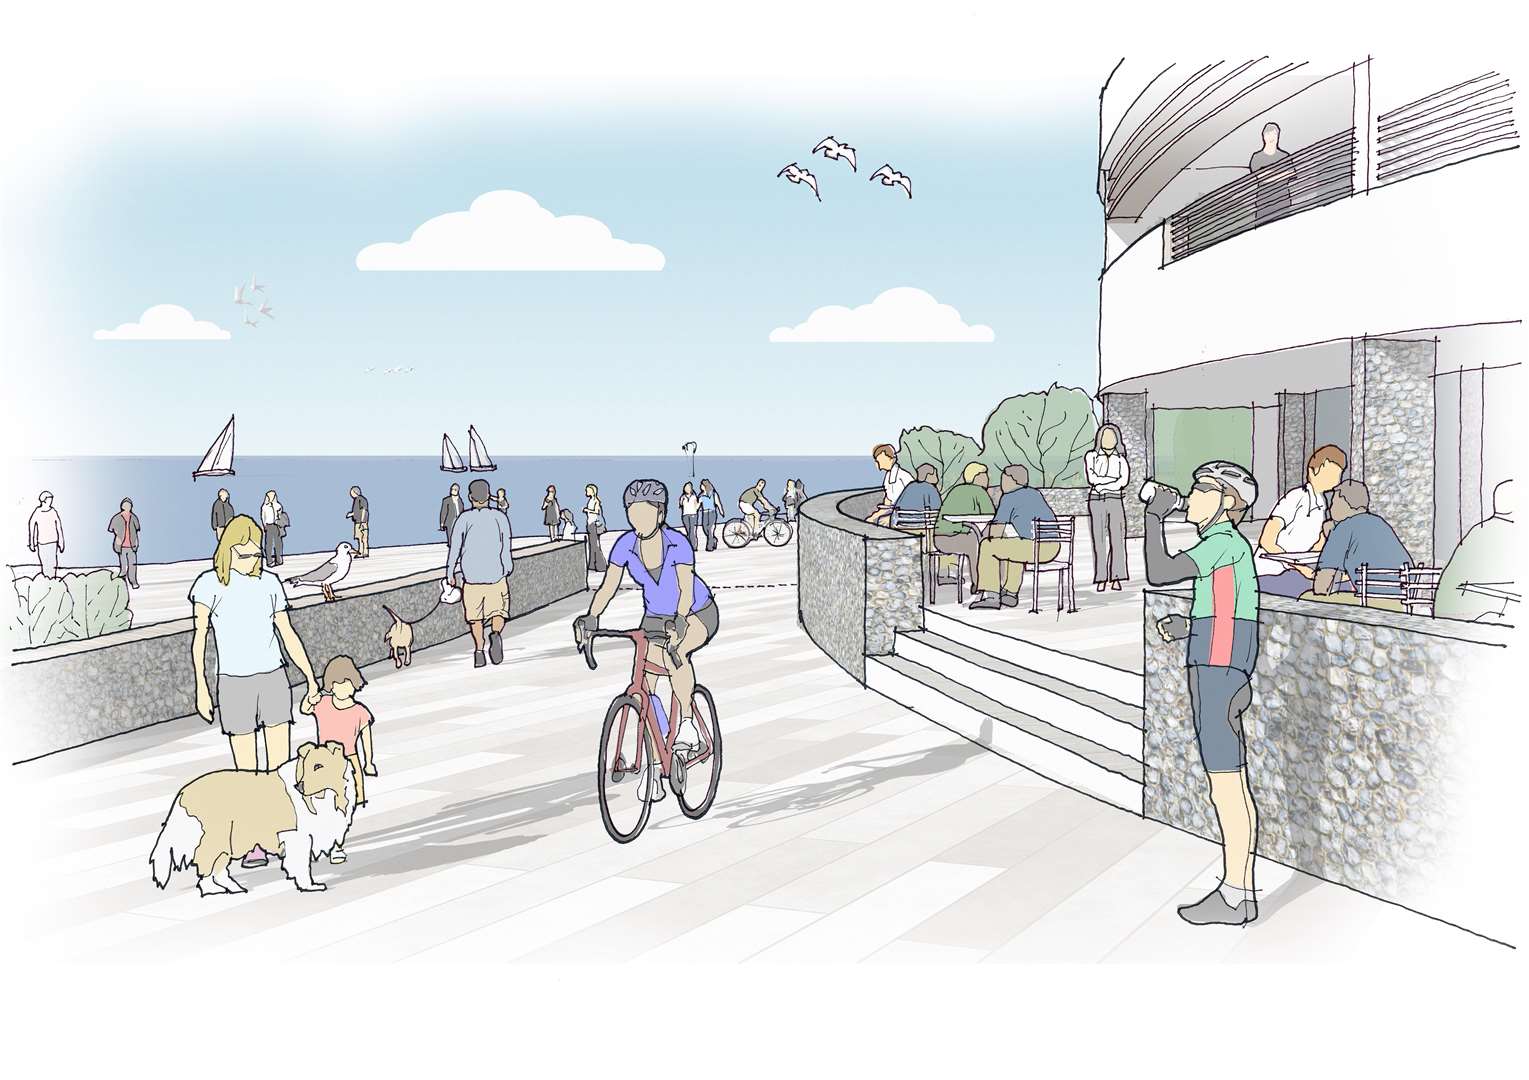 An artist’s impression of the proposed development on Hythe seafront